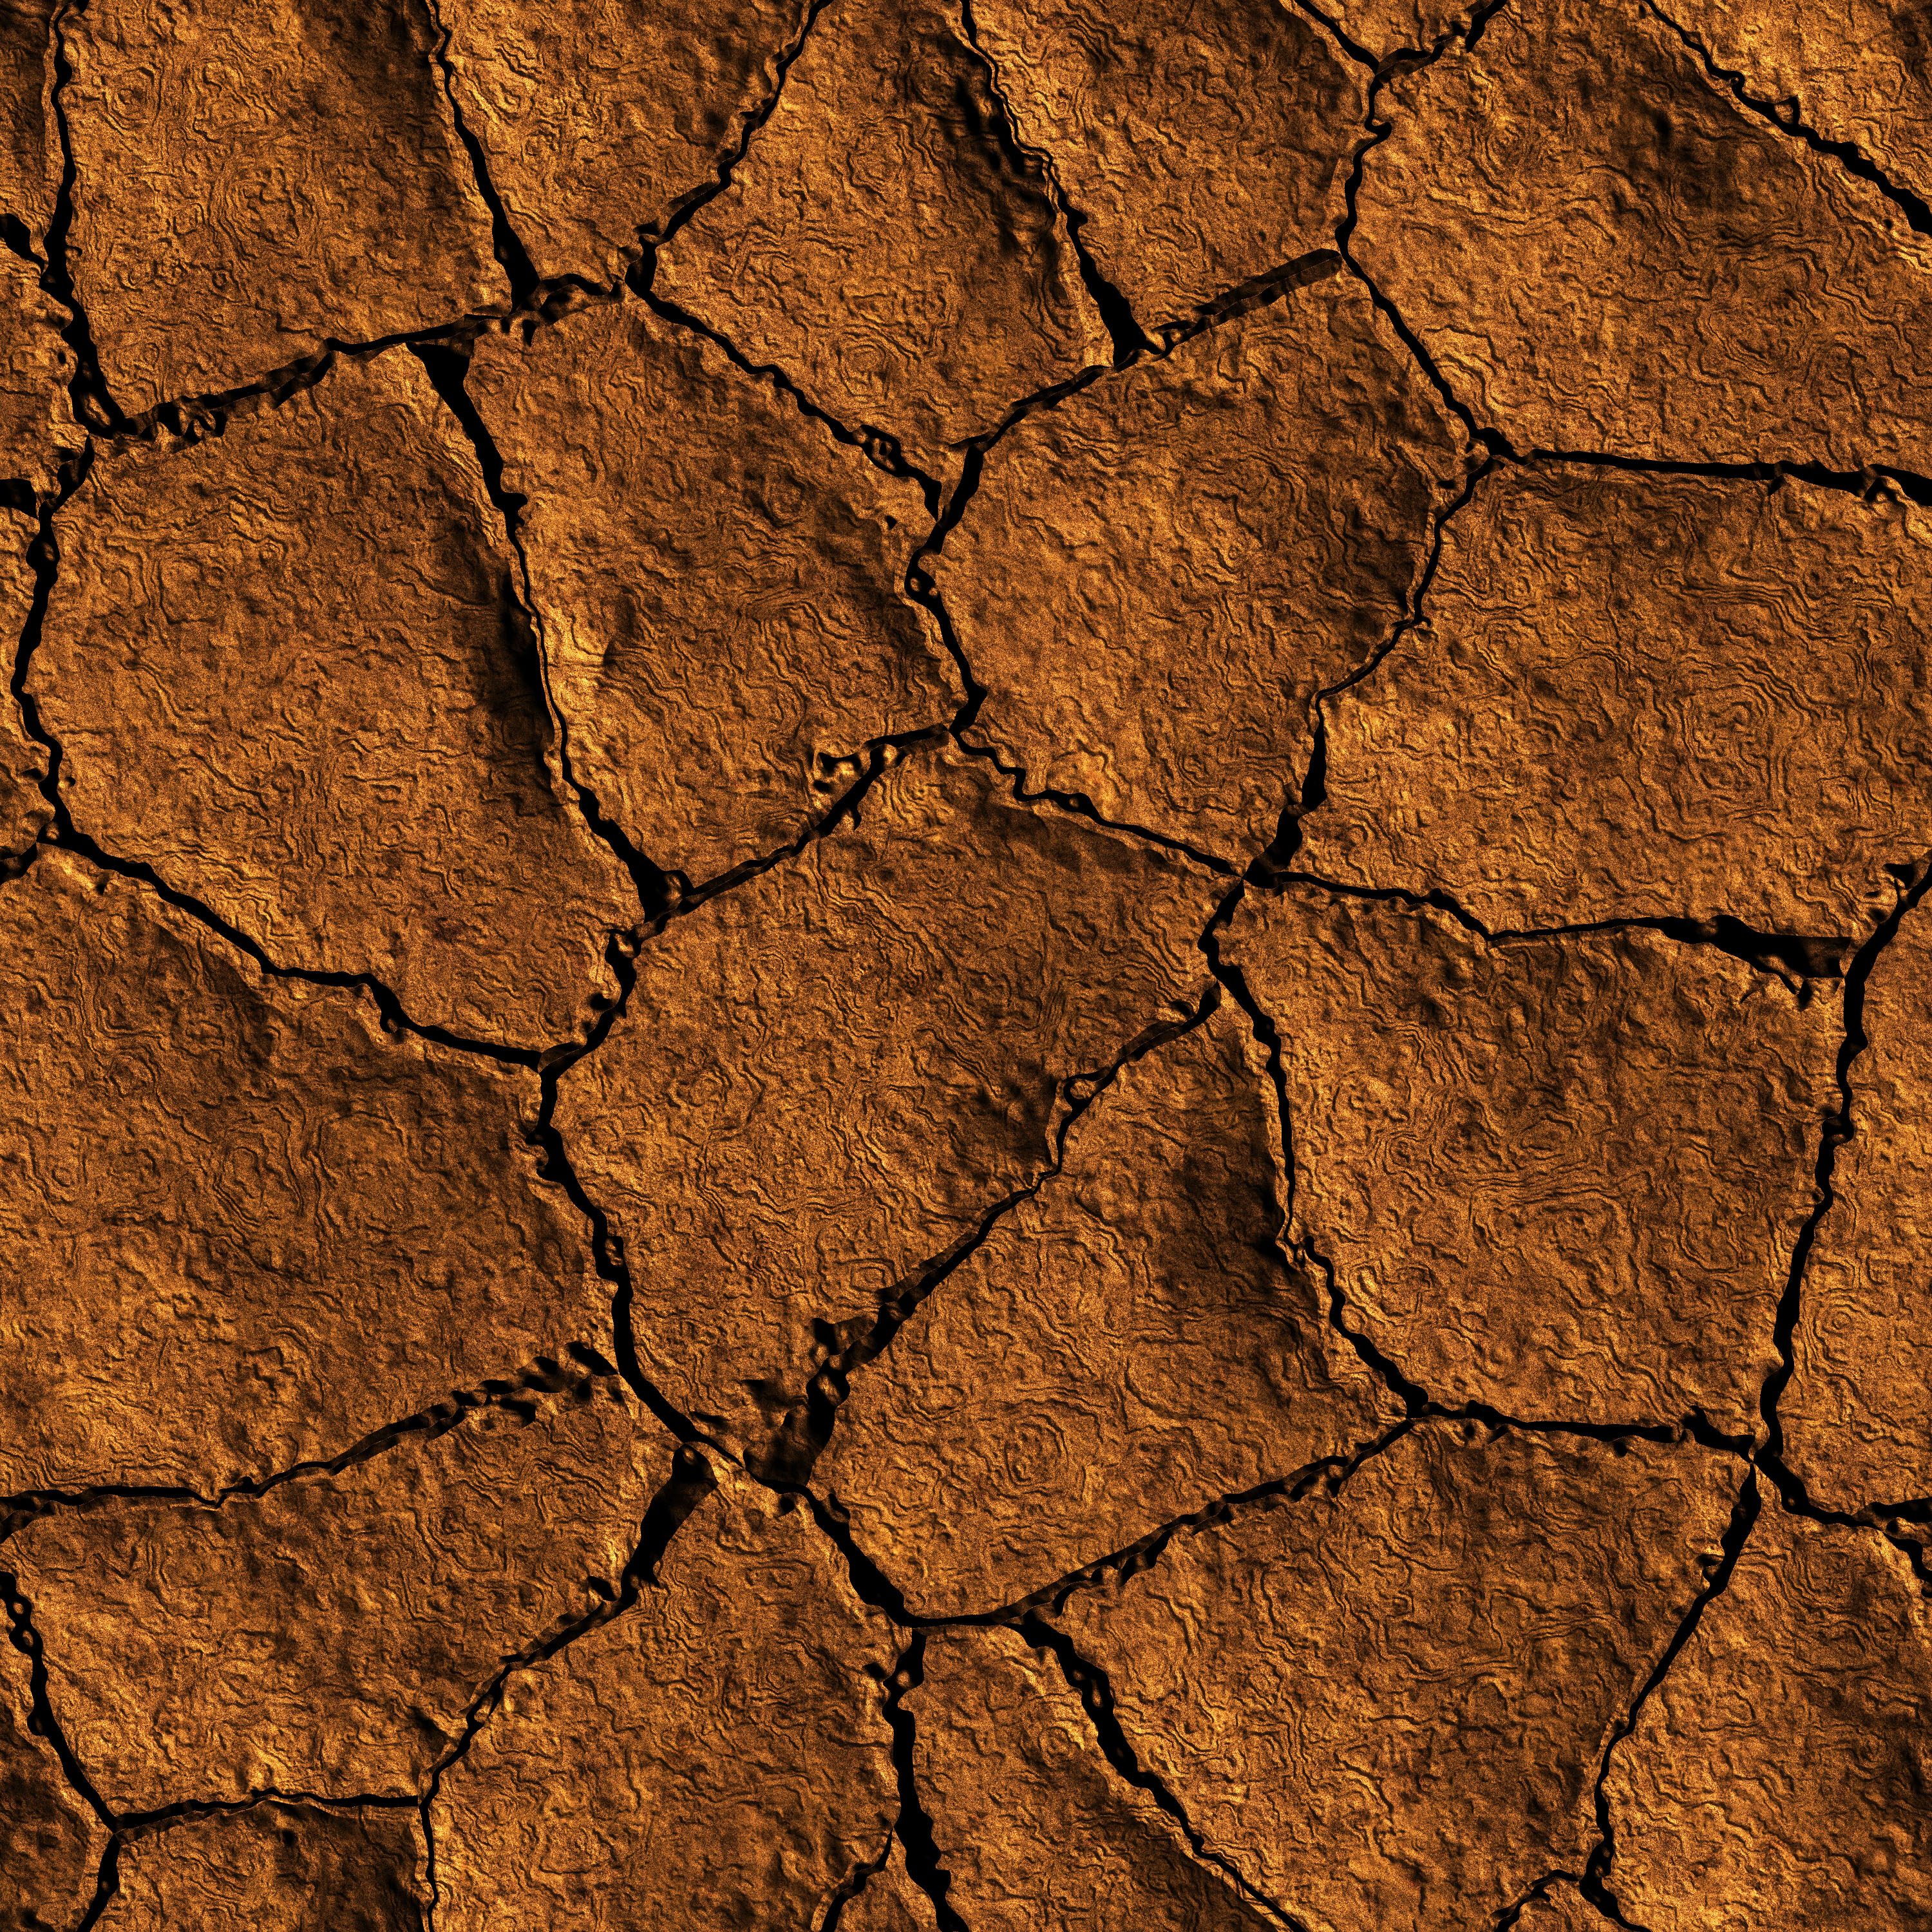 102-16526717-seamless-texture-earth-cracked-because-of-drought.jpg